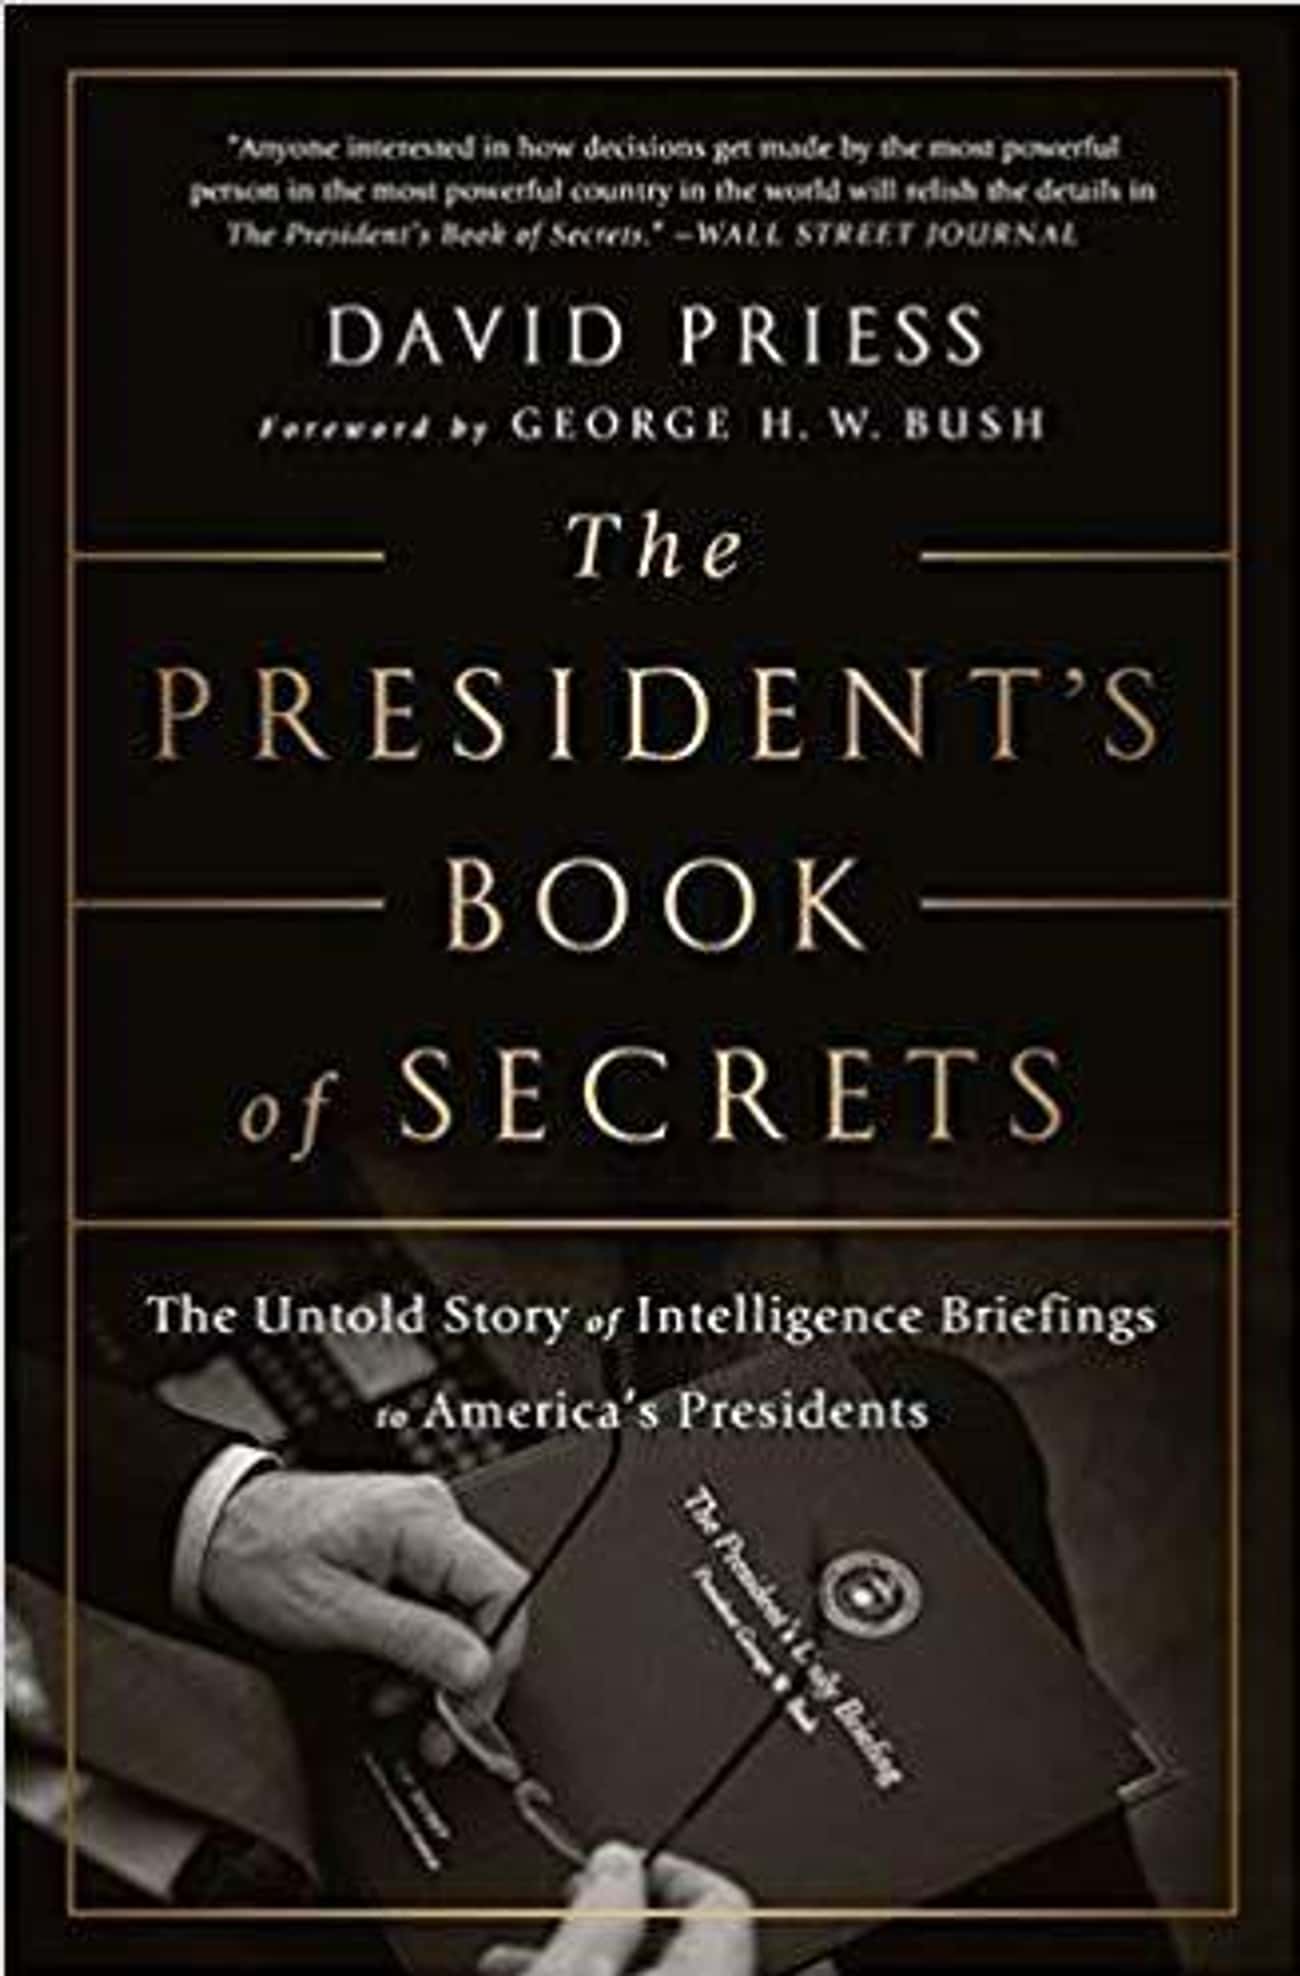 The &#39;Book of Secrets&#39; Might Just Be A Metaphor For The President&#39;s Regular Security Briefings